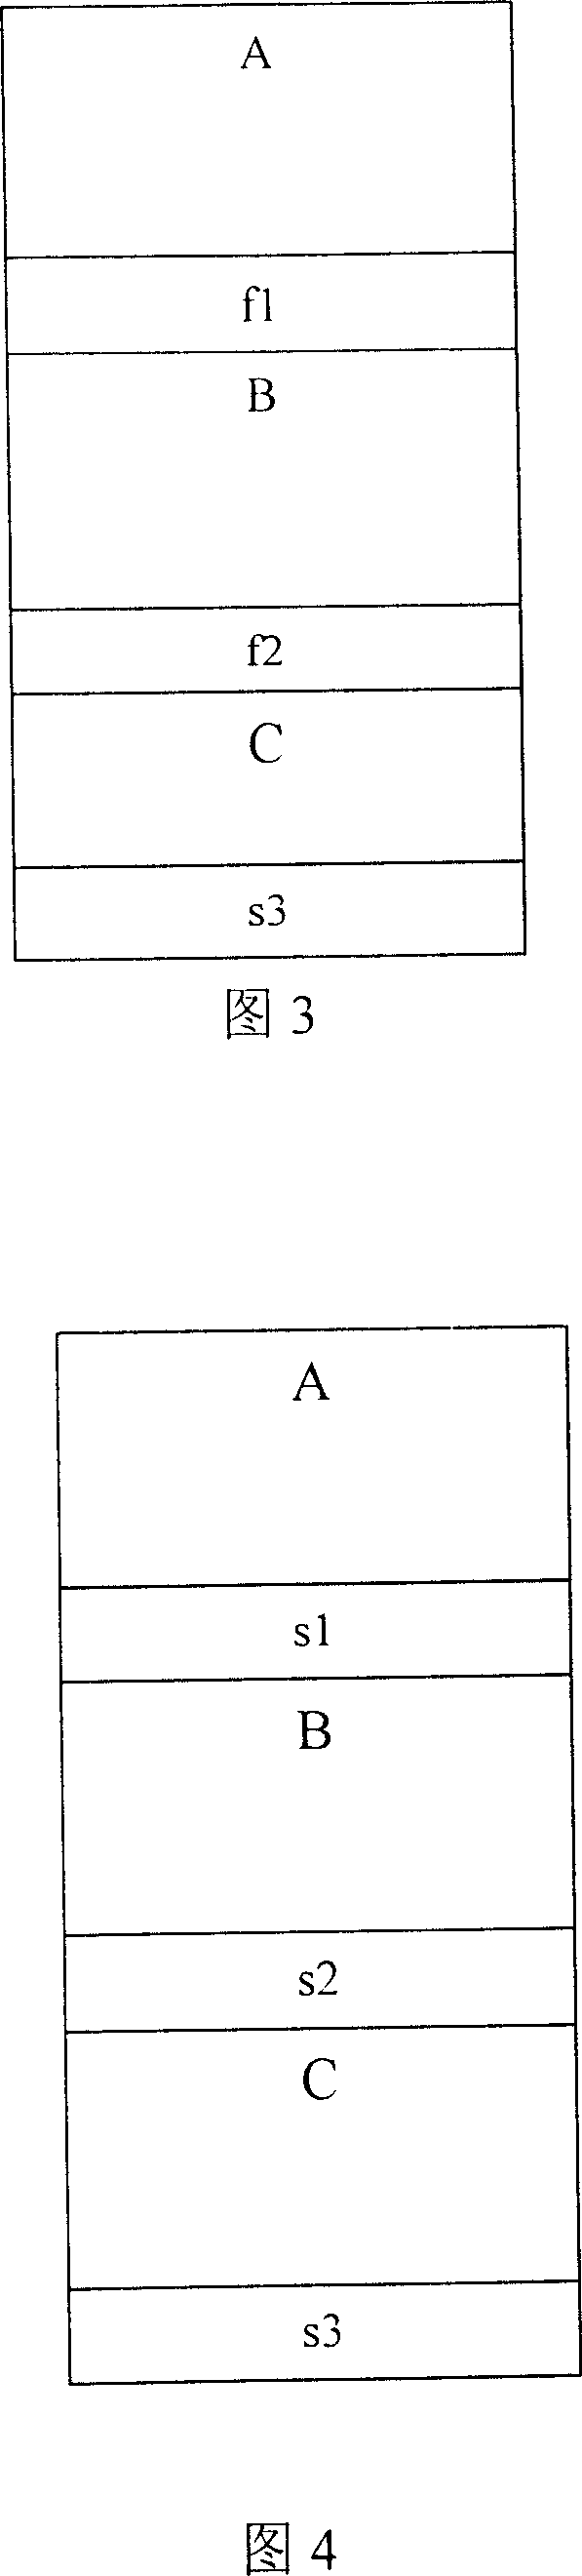 Data cut-off protection and repairing method of inlaid apparatus